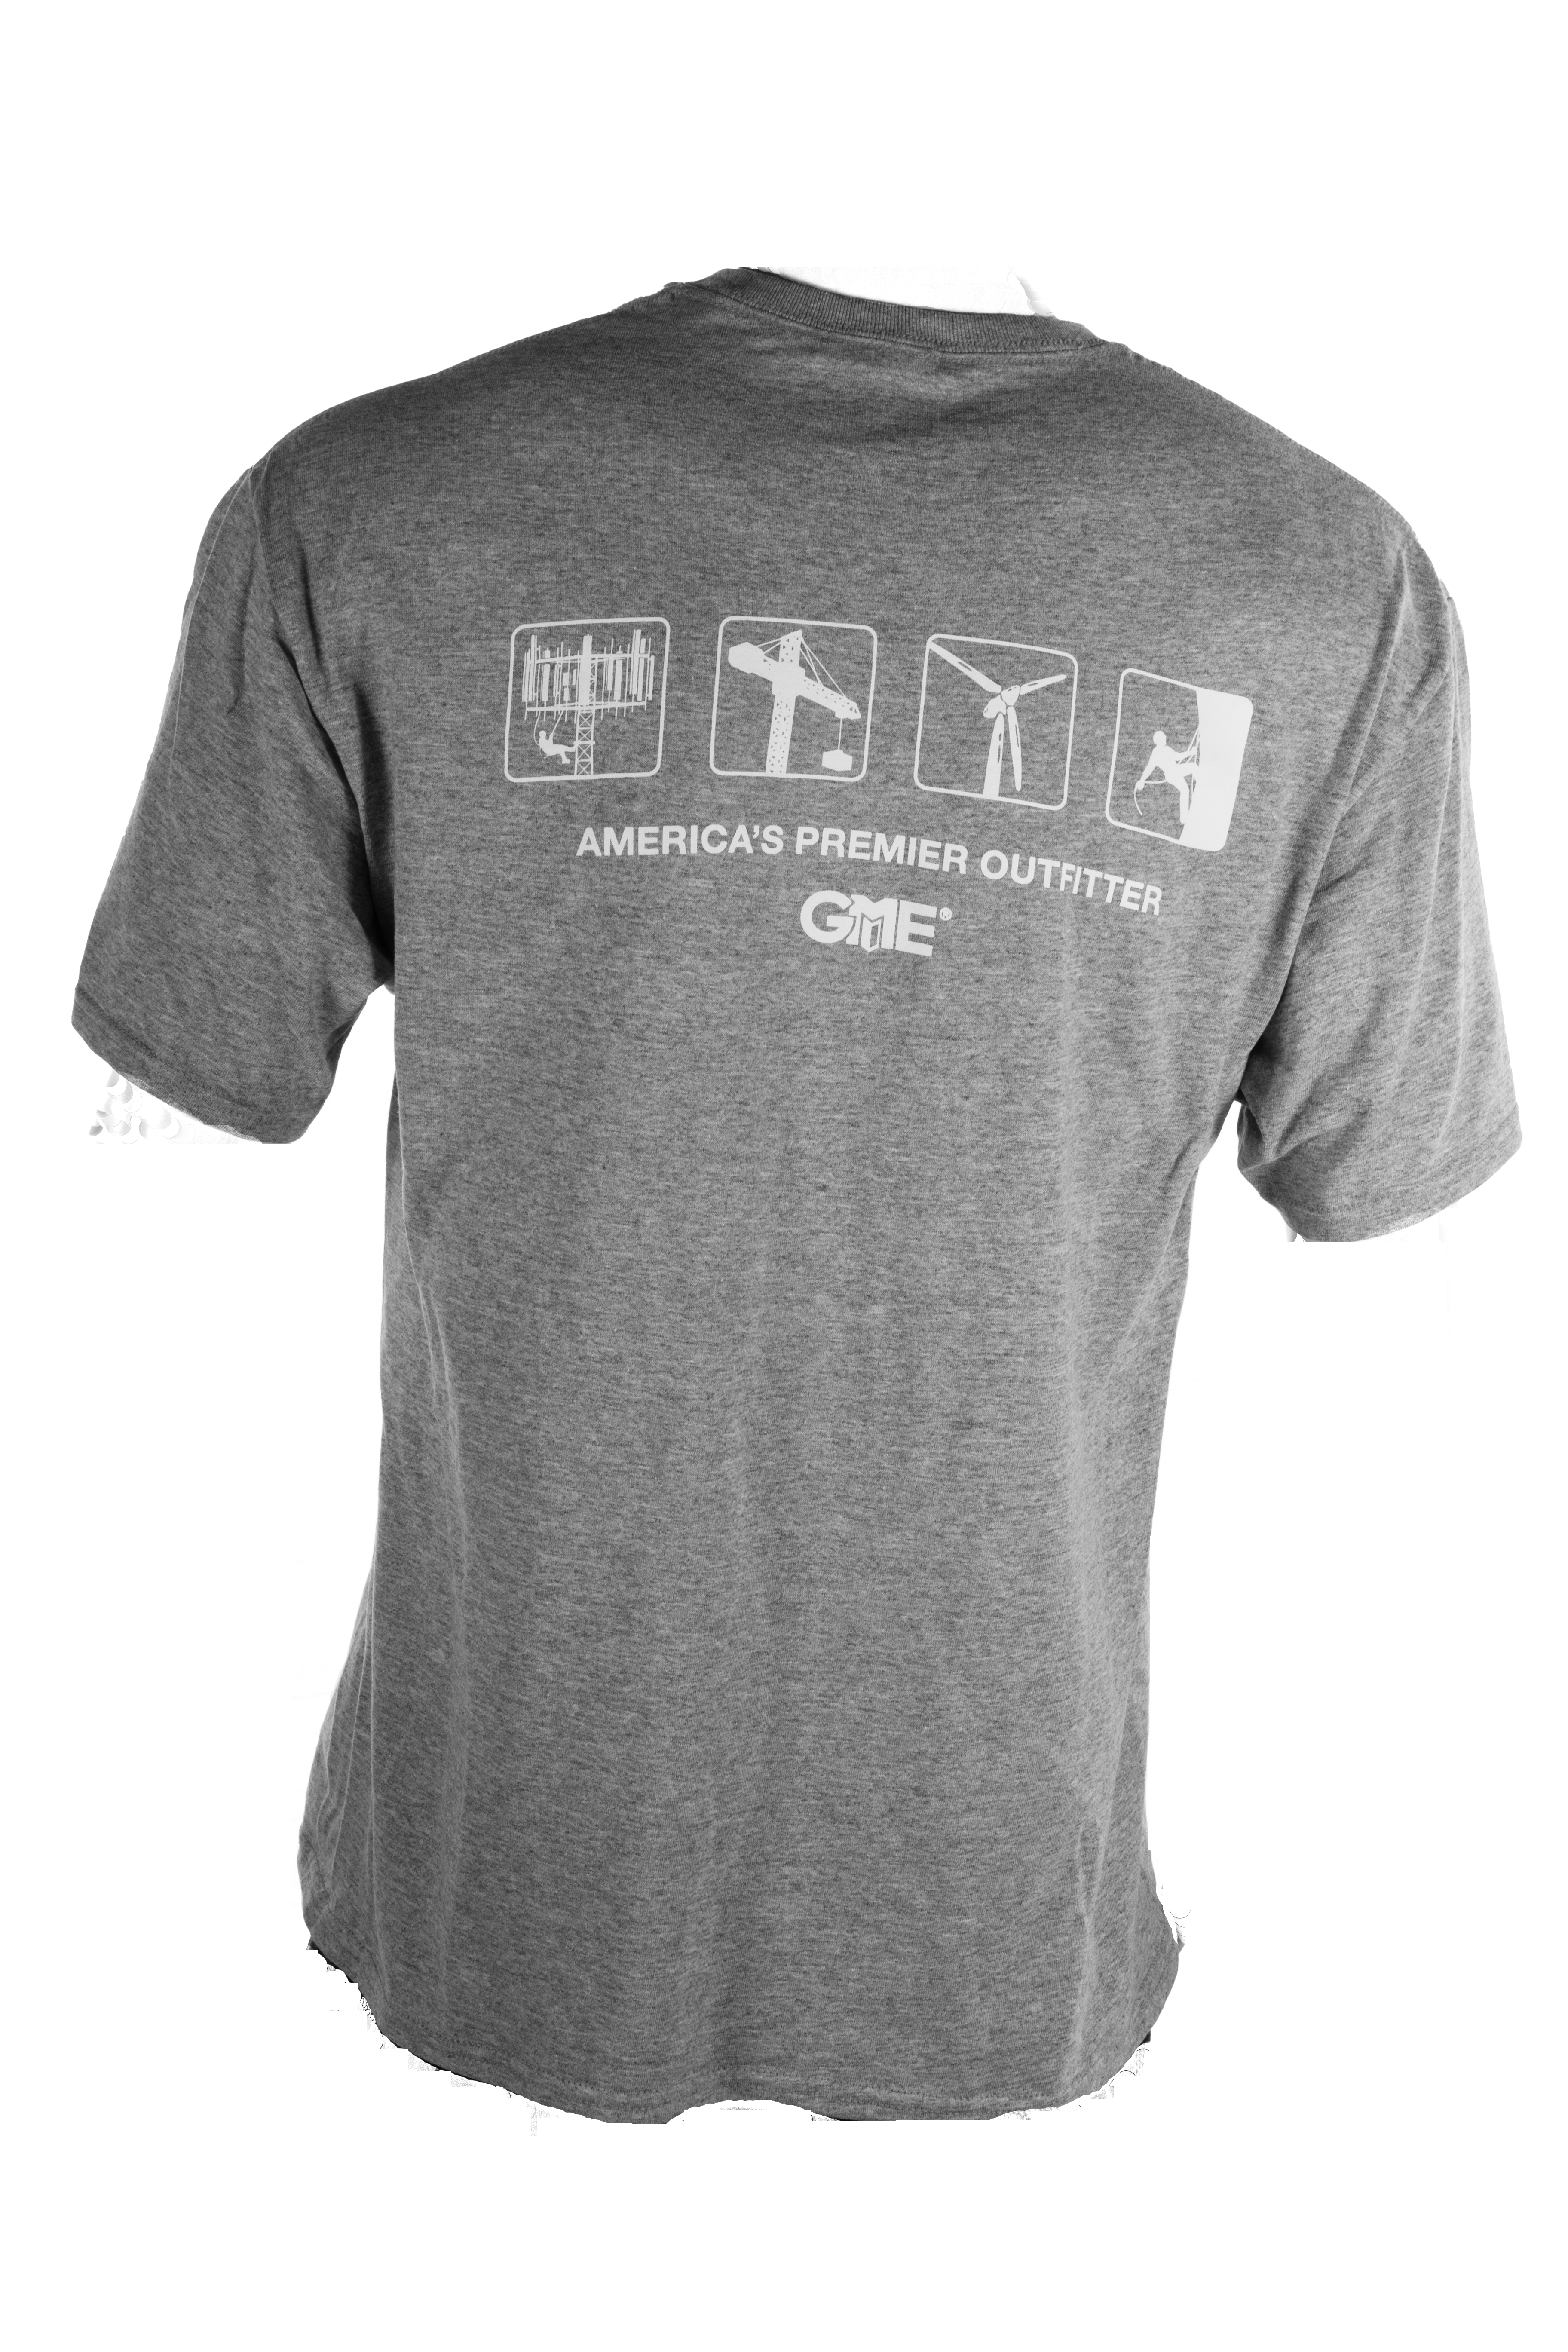 GME Supply 'Climb Higher' 2021 T-Shirt from GME Supply